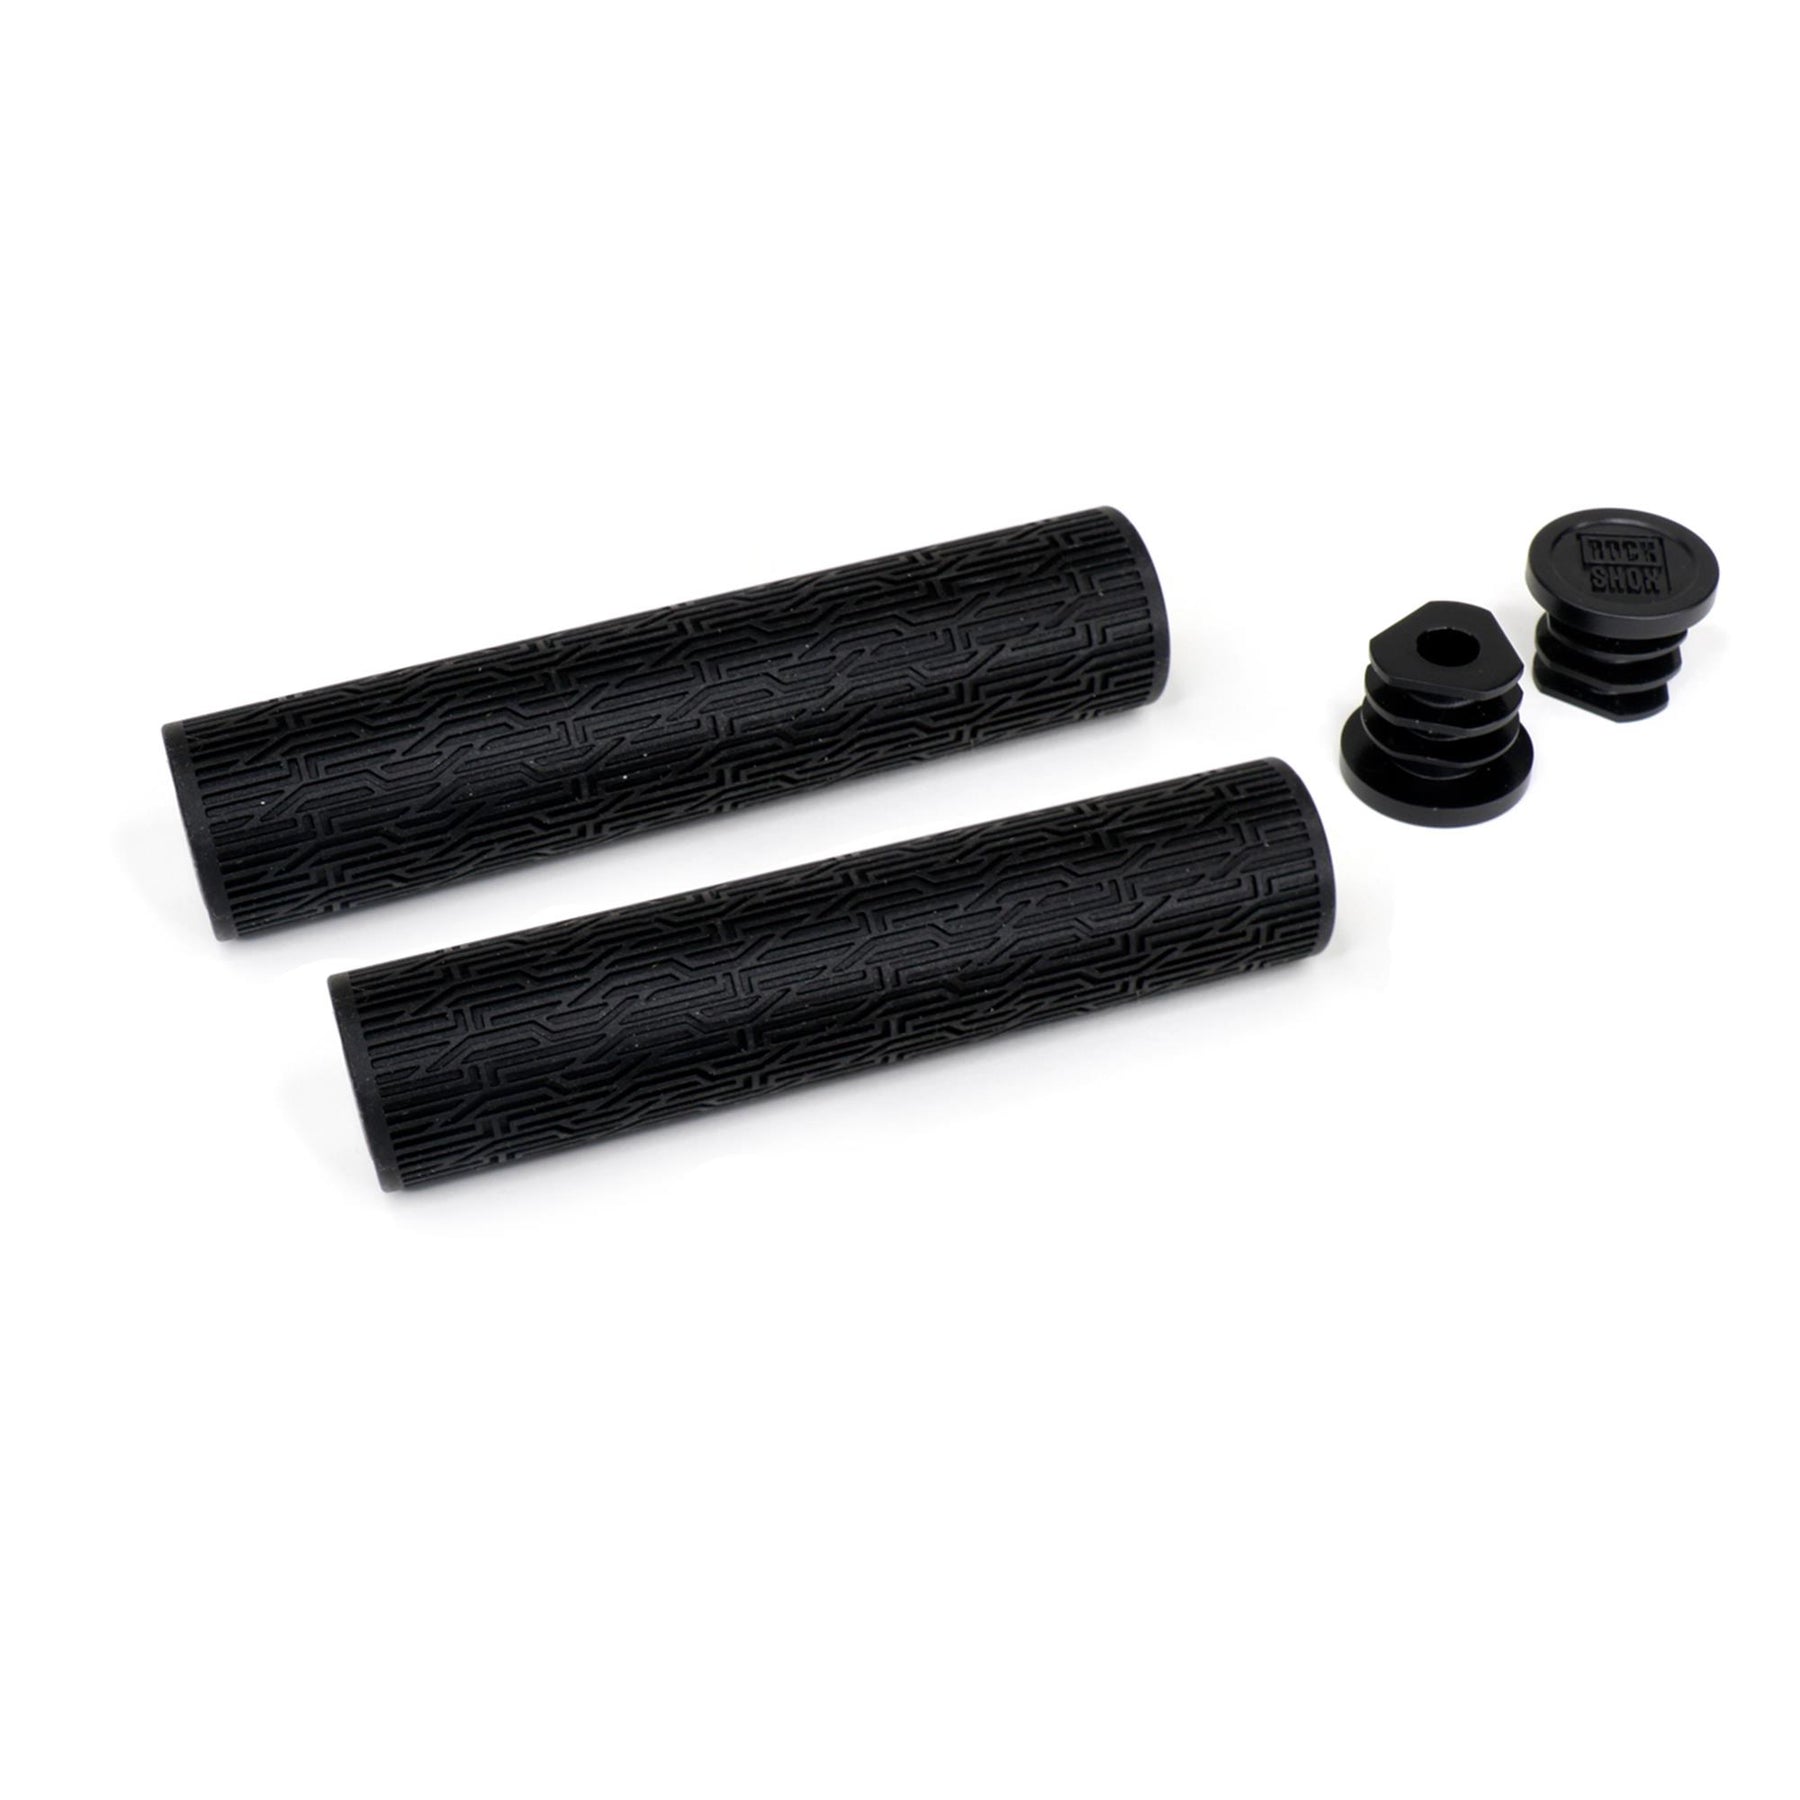 Rockshox Textured Grips With End Plugs Black 135mm